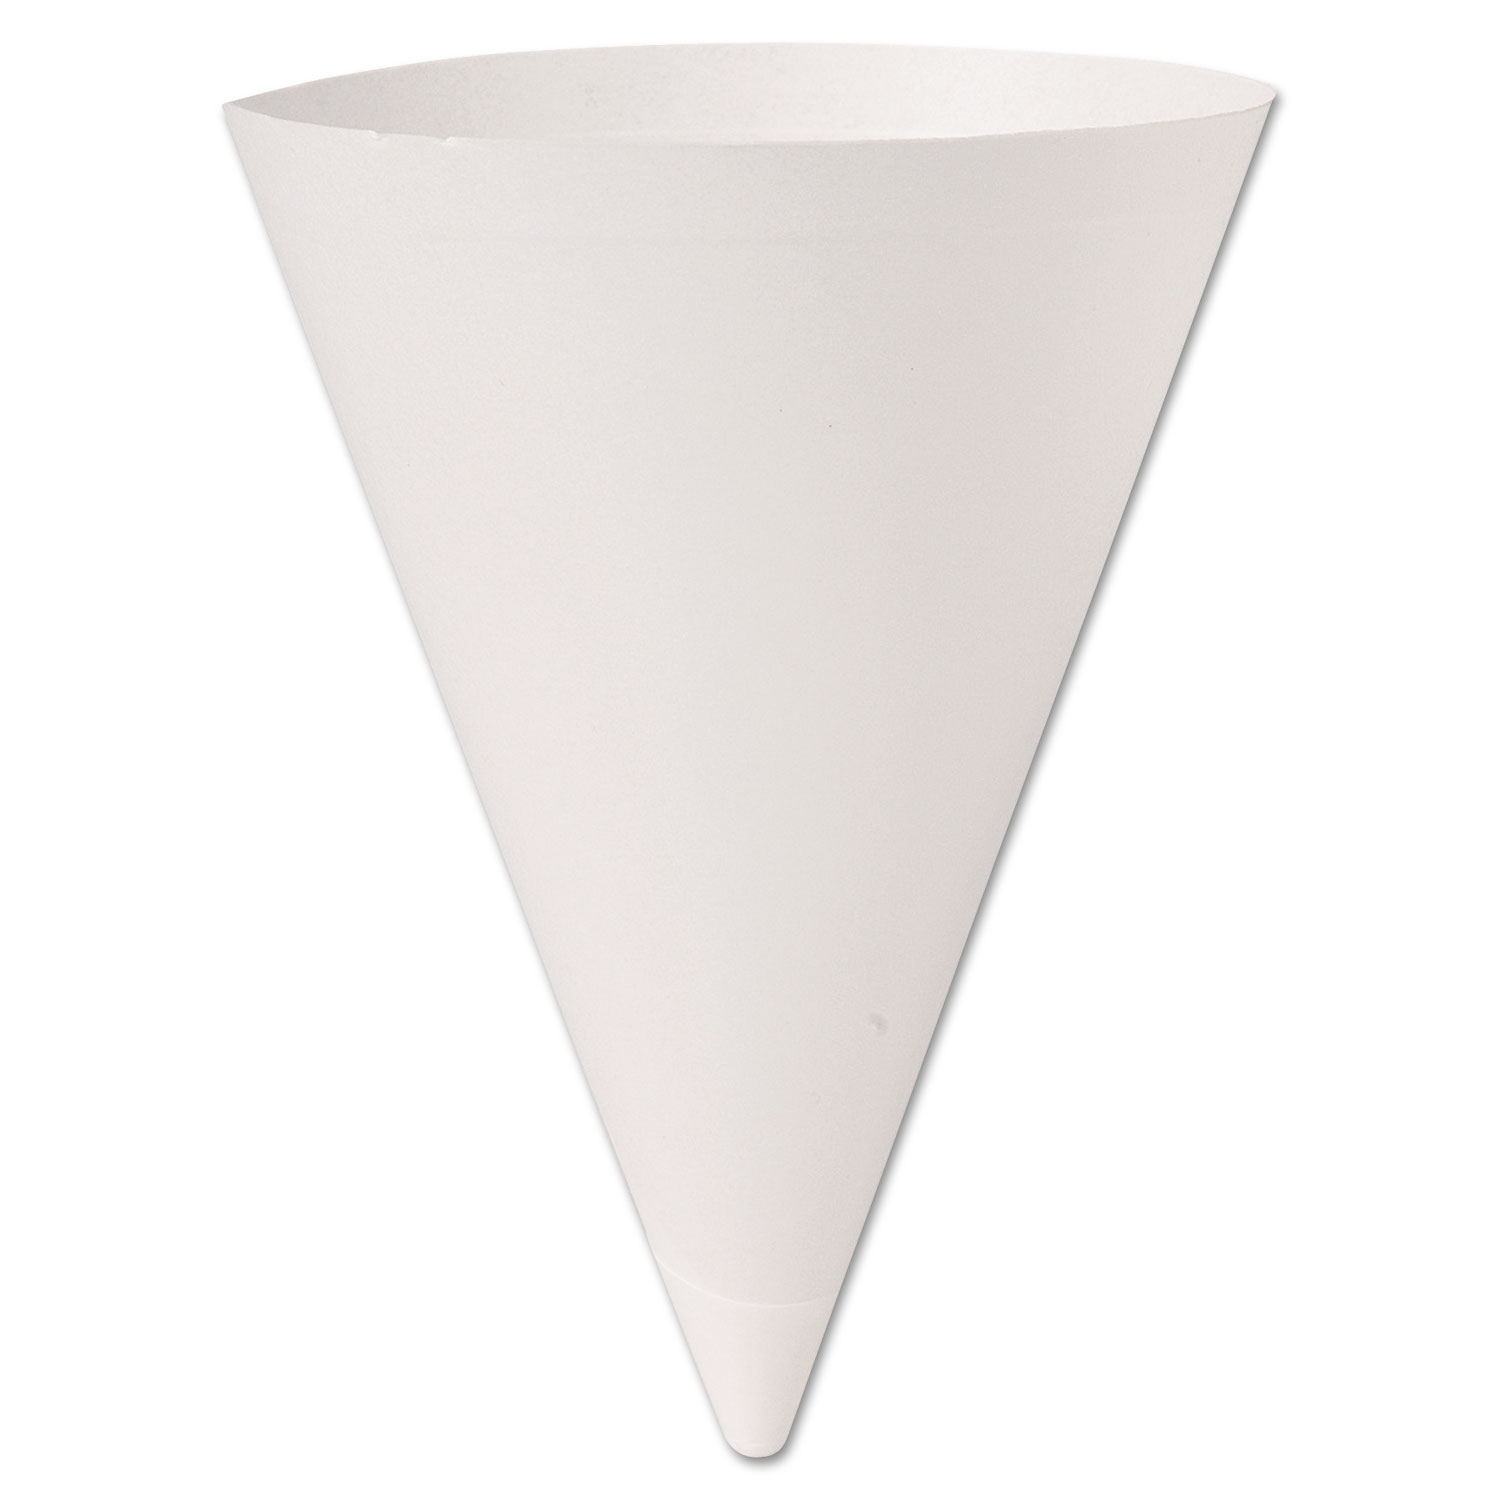  Dart 156BB-2050 Bare Treated Paper Cone Water Cups, 7 oz., White, 250/Bag, 20 Bags/Carton (SCC156BB) 